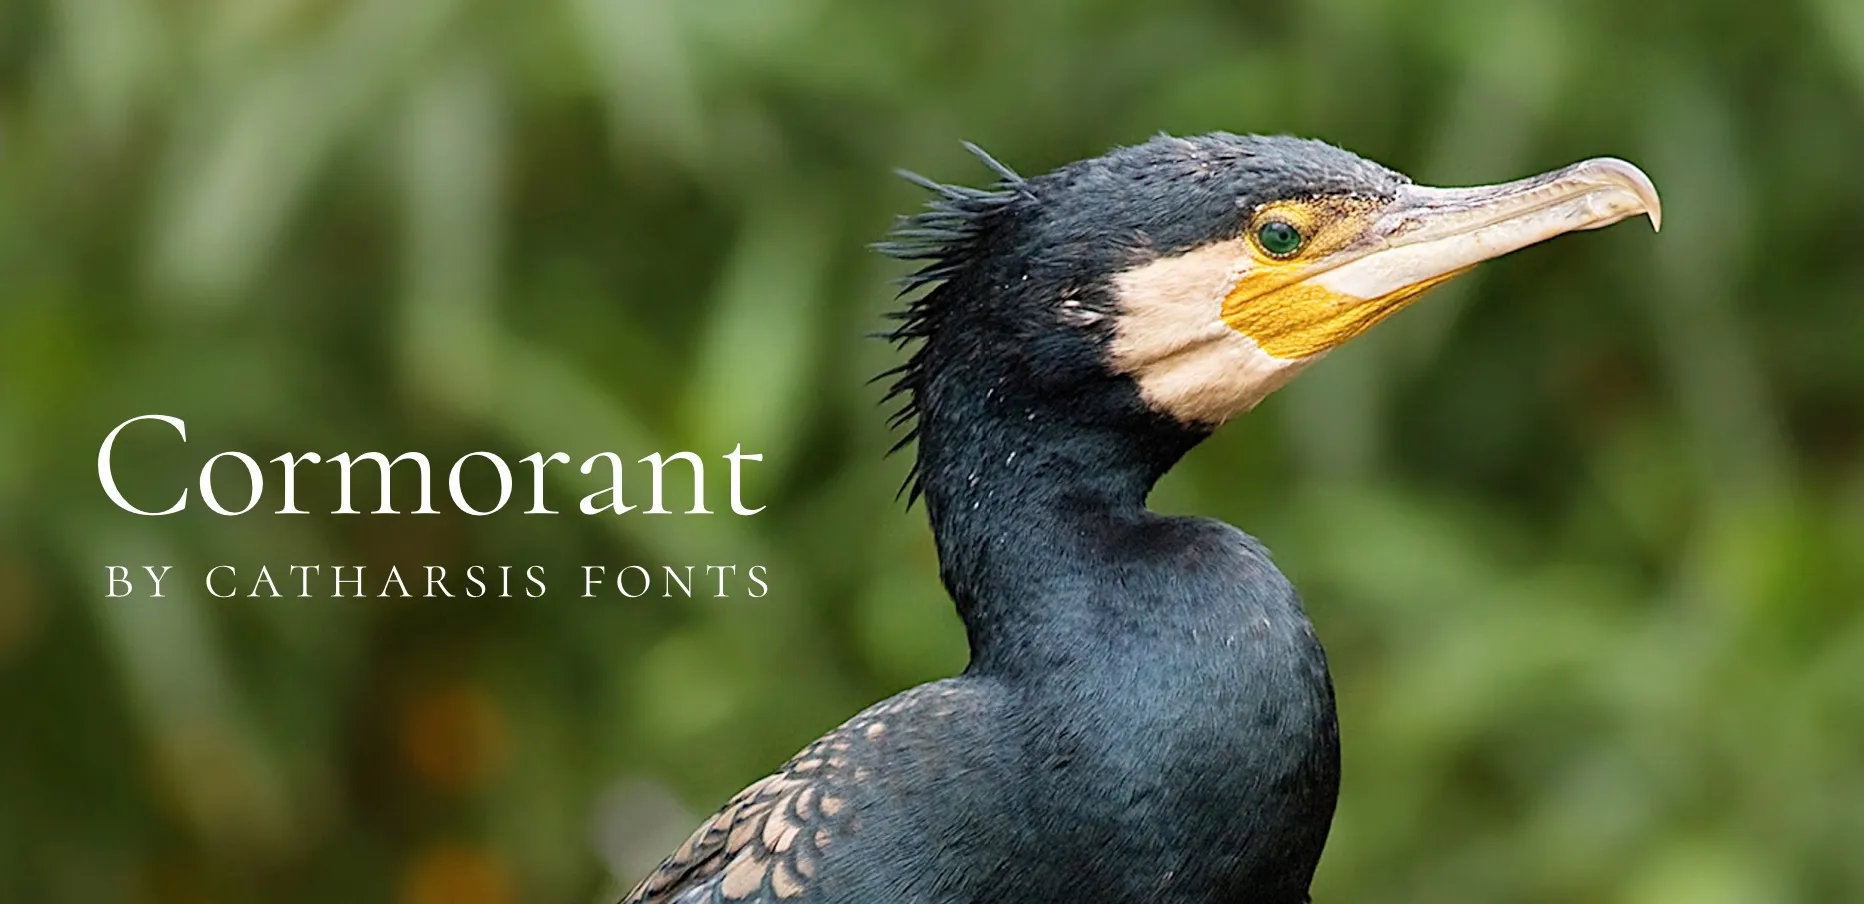 cormorant-font-banner The 33 Best Fonts for PowerPoint Presentations